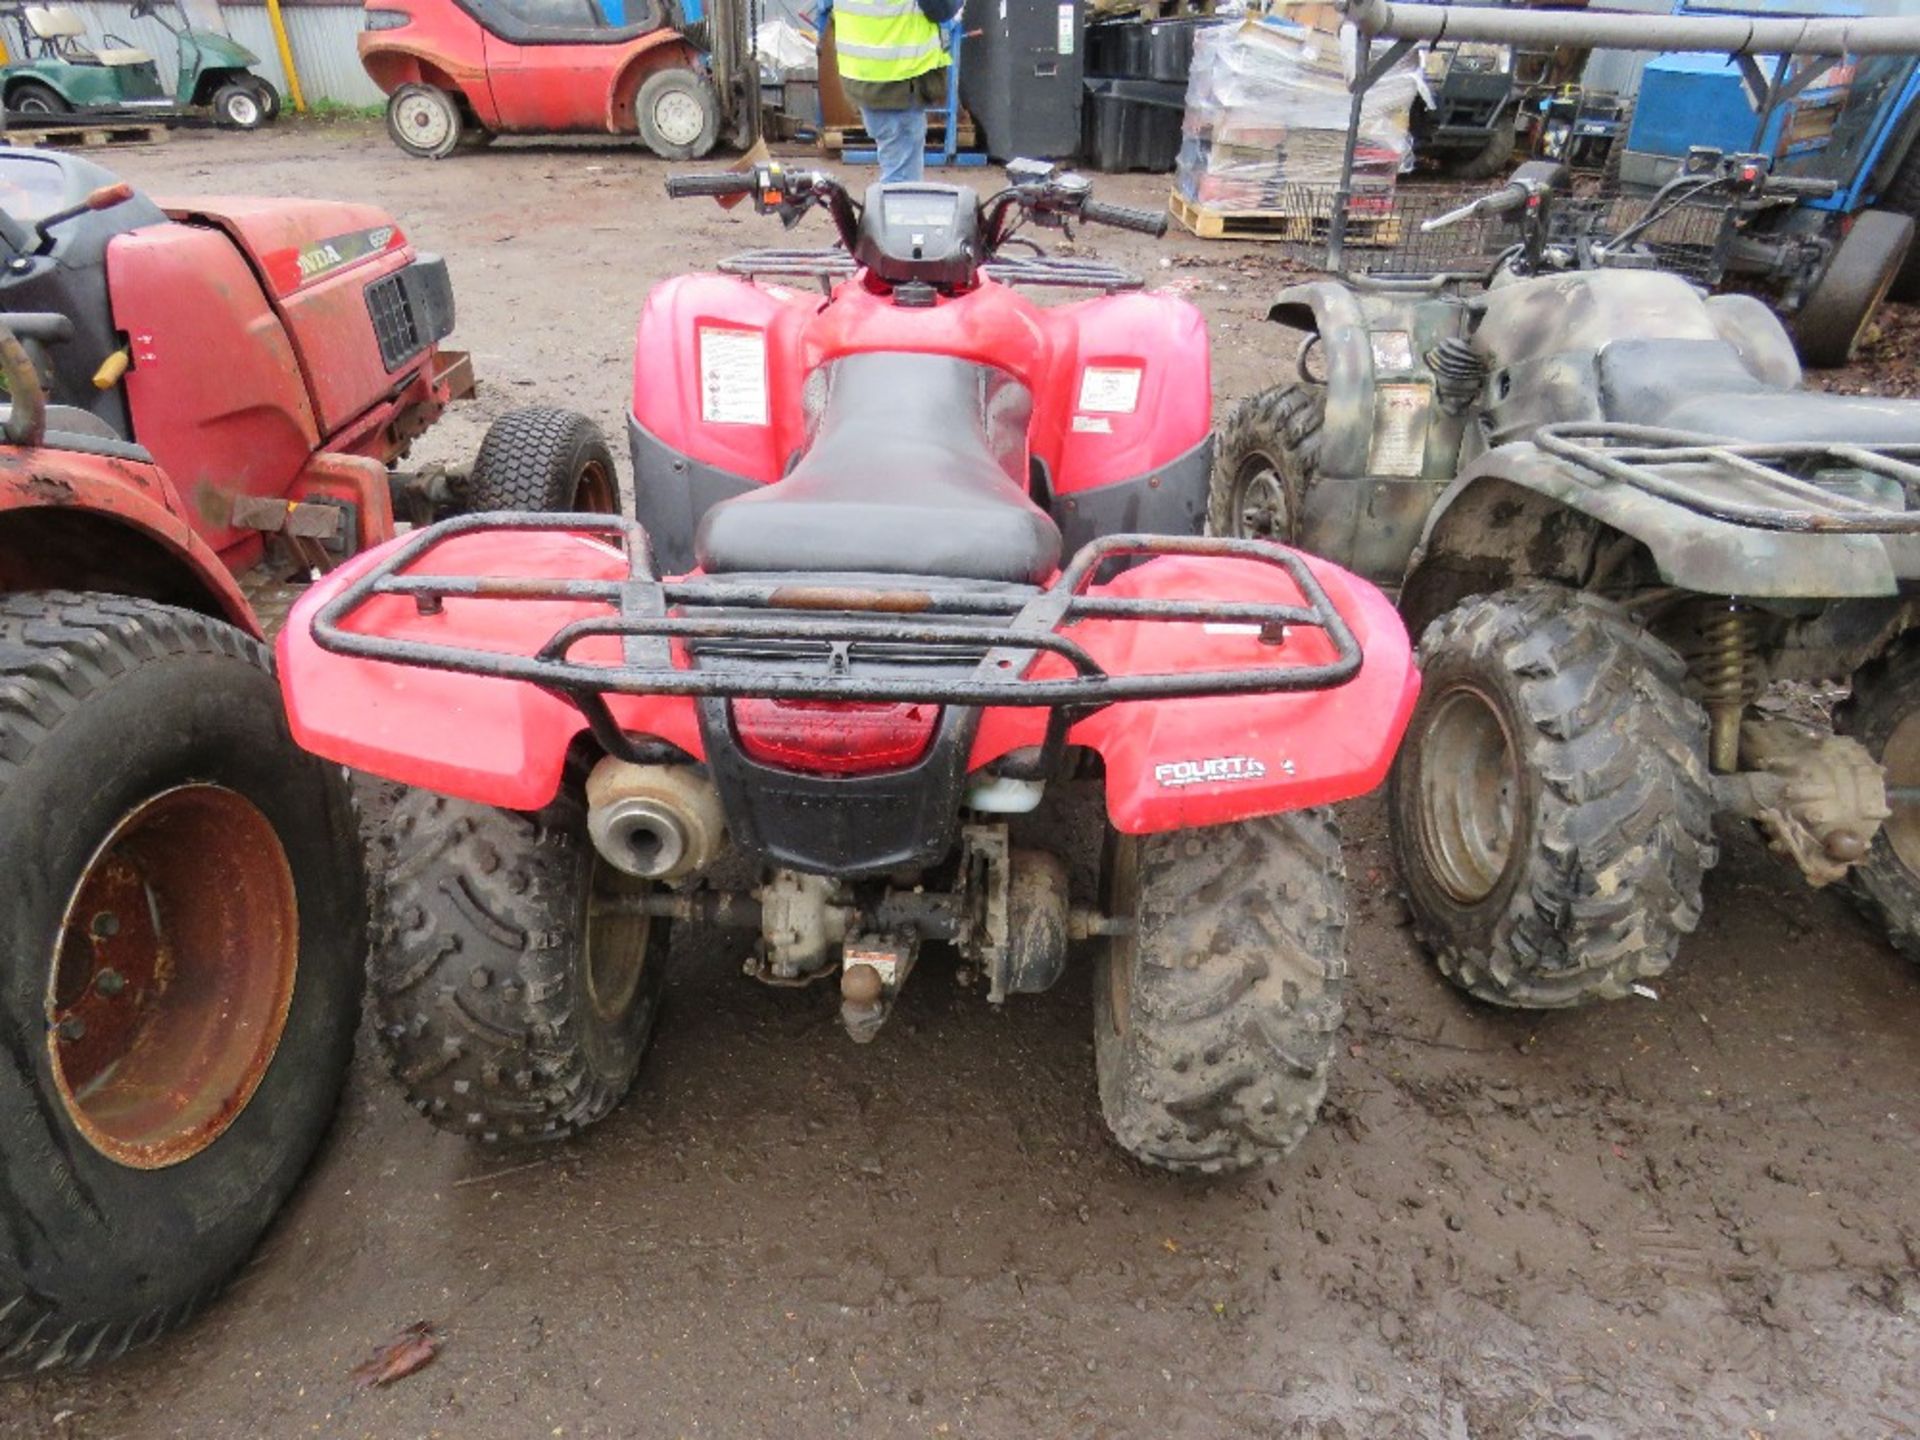 HONDA FOURTRAK 400 QUAD BIKE, YEAR 2003 APPROX. WHEN TESTED WAS SEEN TO RUN, DRIVE AND BRAKE. - Image 3 of 5